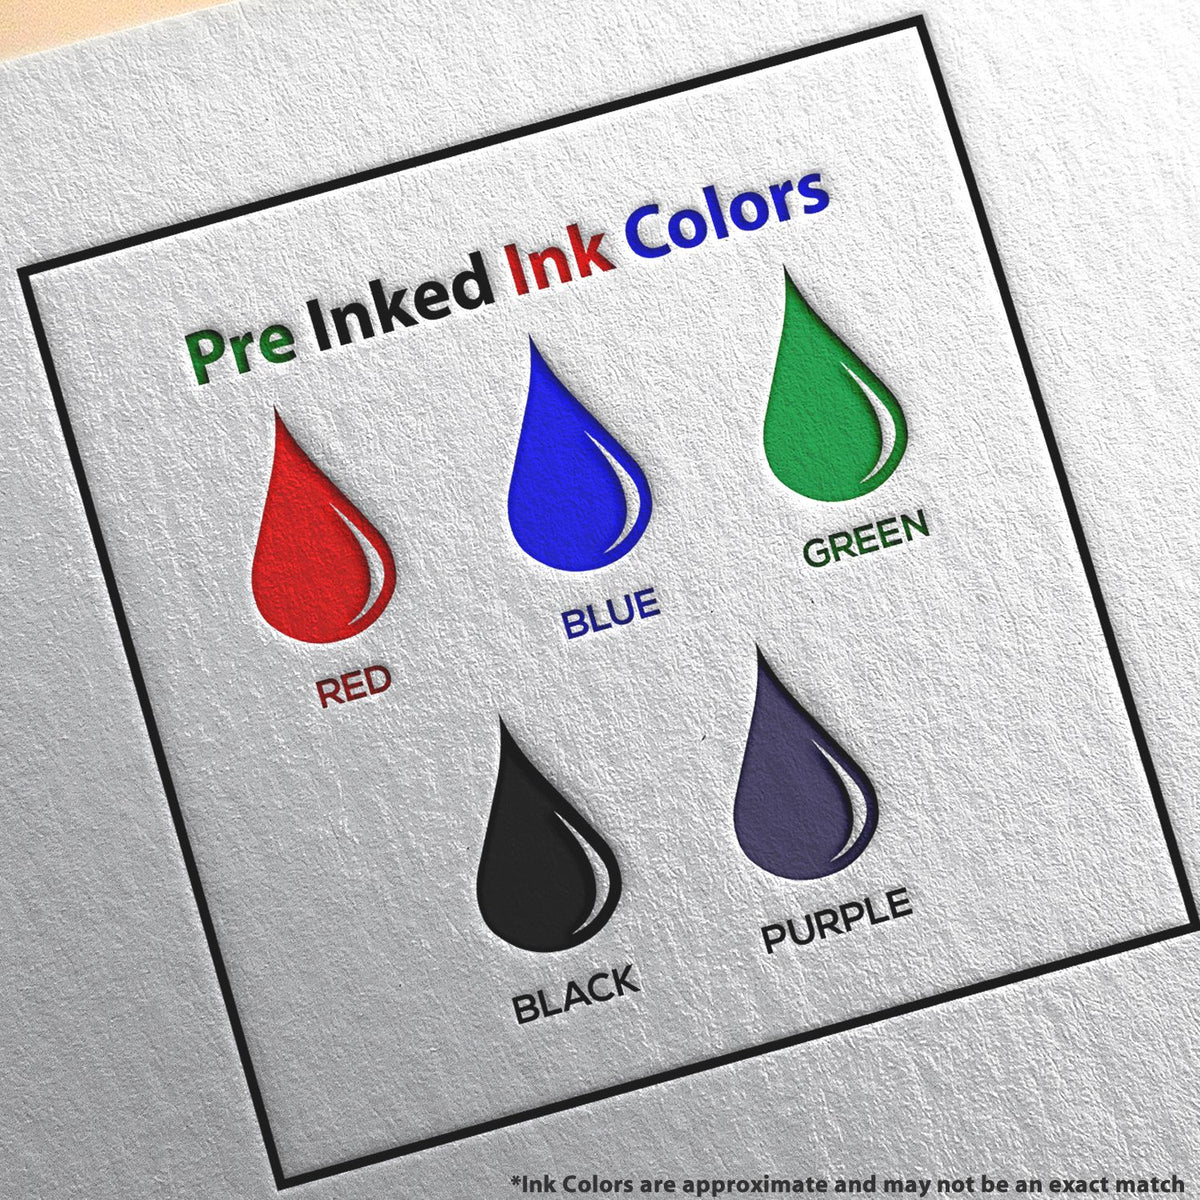 A picture showing the different ink colors or hues available for the Slim Pre-Inked Michigan Landscape Architect Seal Stamp product.